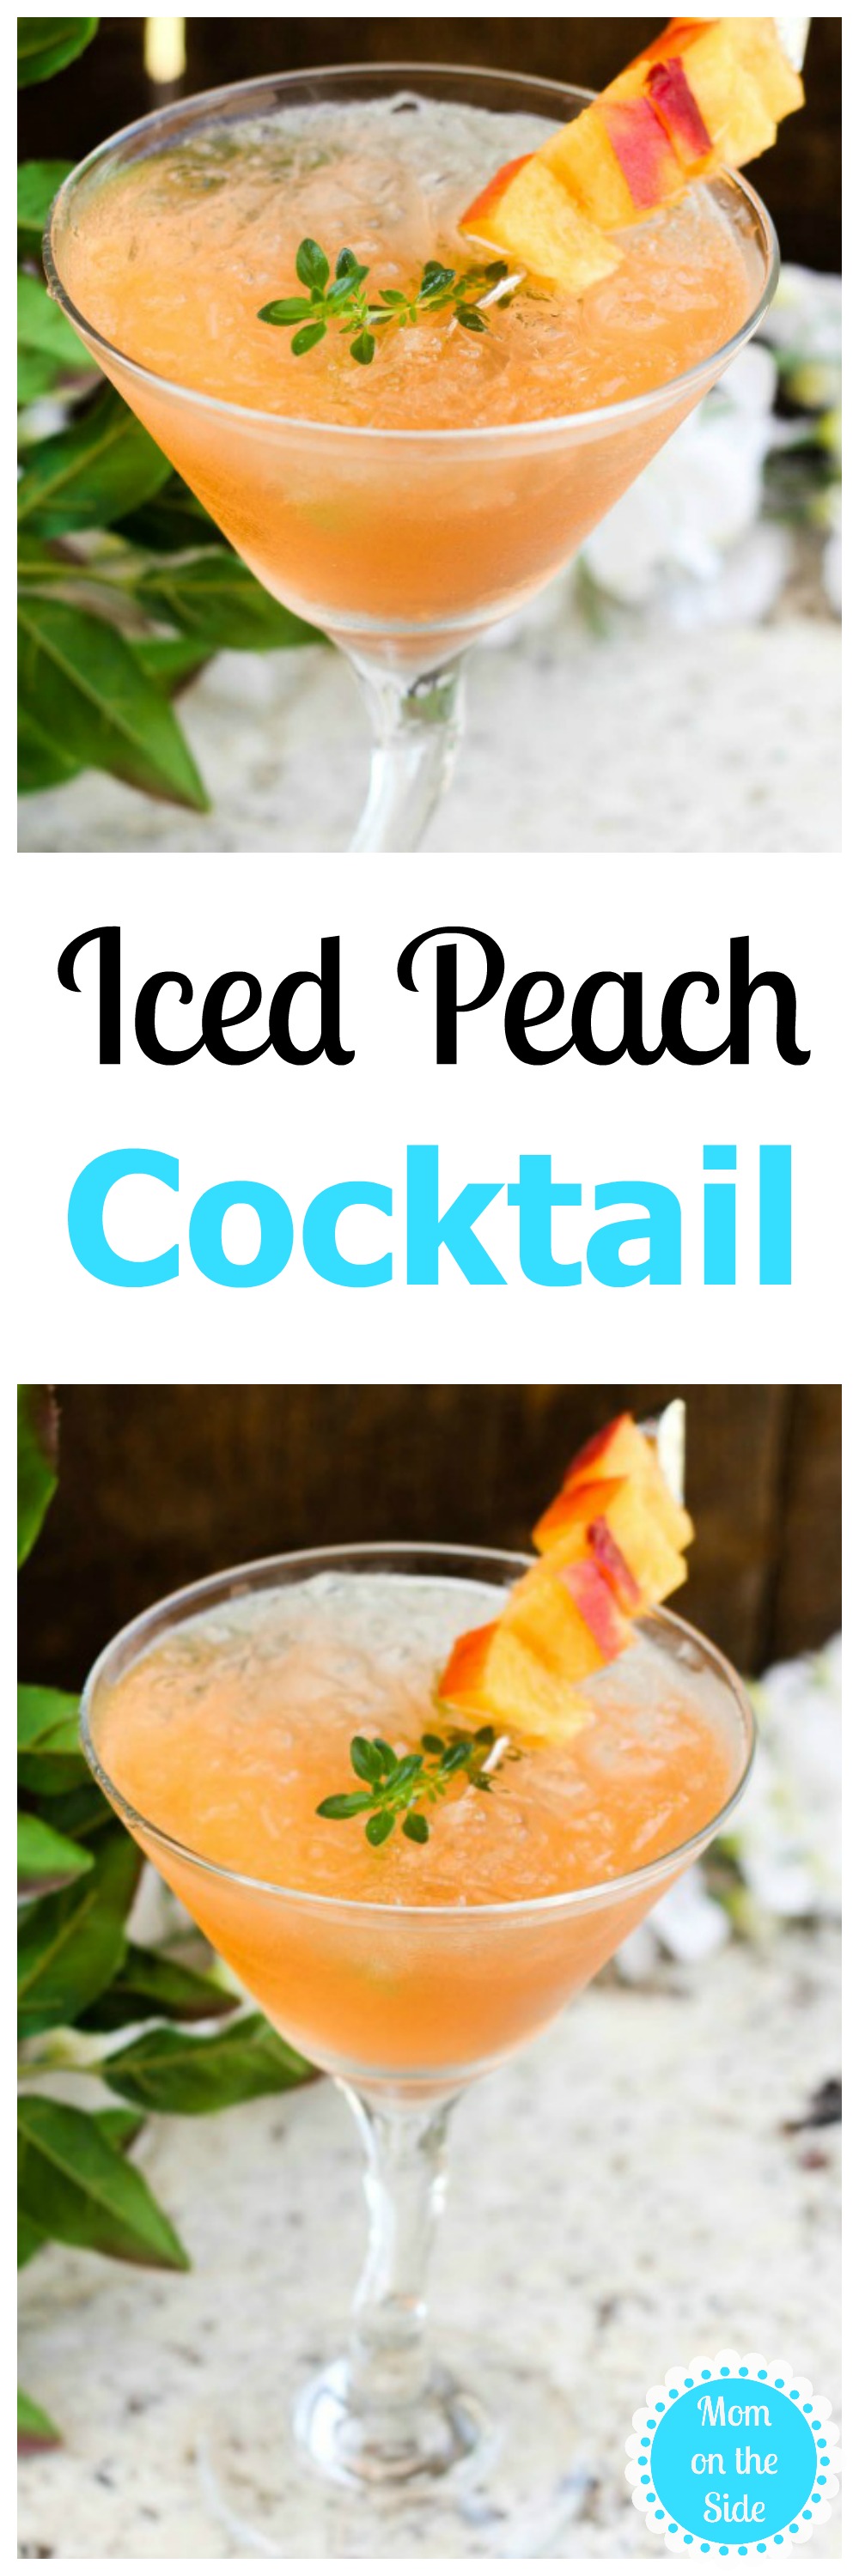 I'm ready for Thirsty Thursday and a delicious cocktail to remind me that I've got this. An Iced Peach Cocktail will do the trick and tastes like summer!